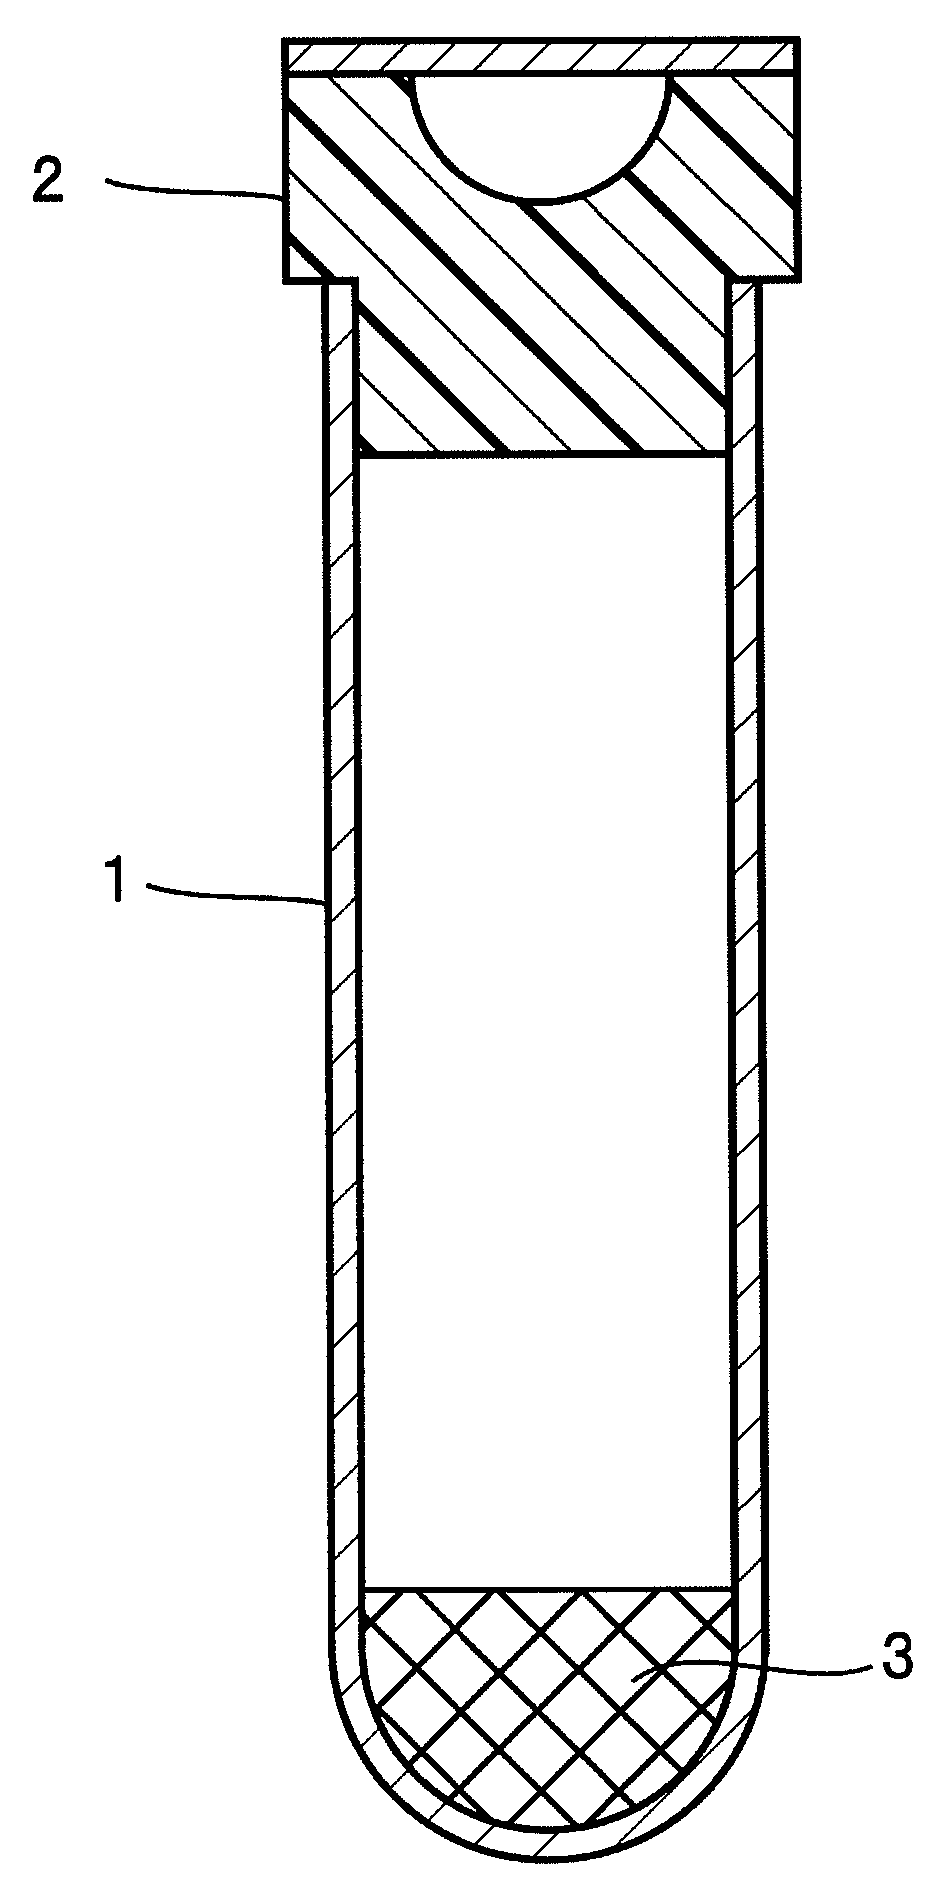 Composition for separation of serum or plasma and container for blood test